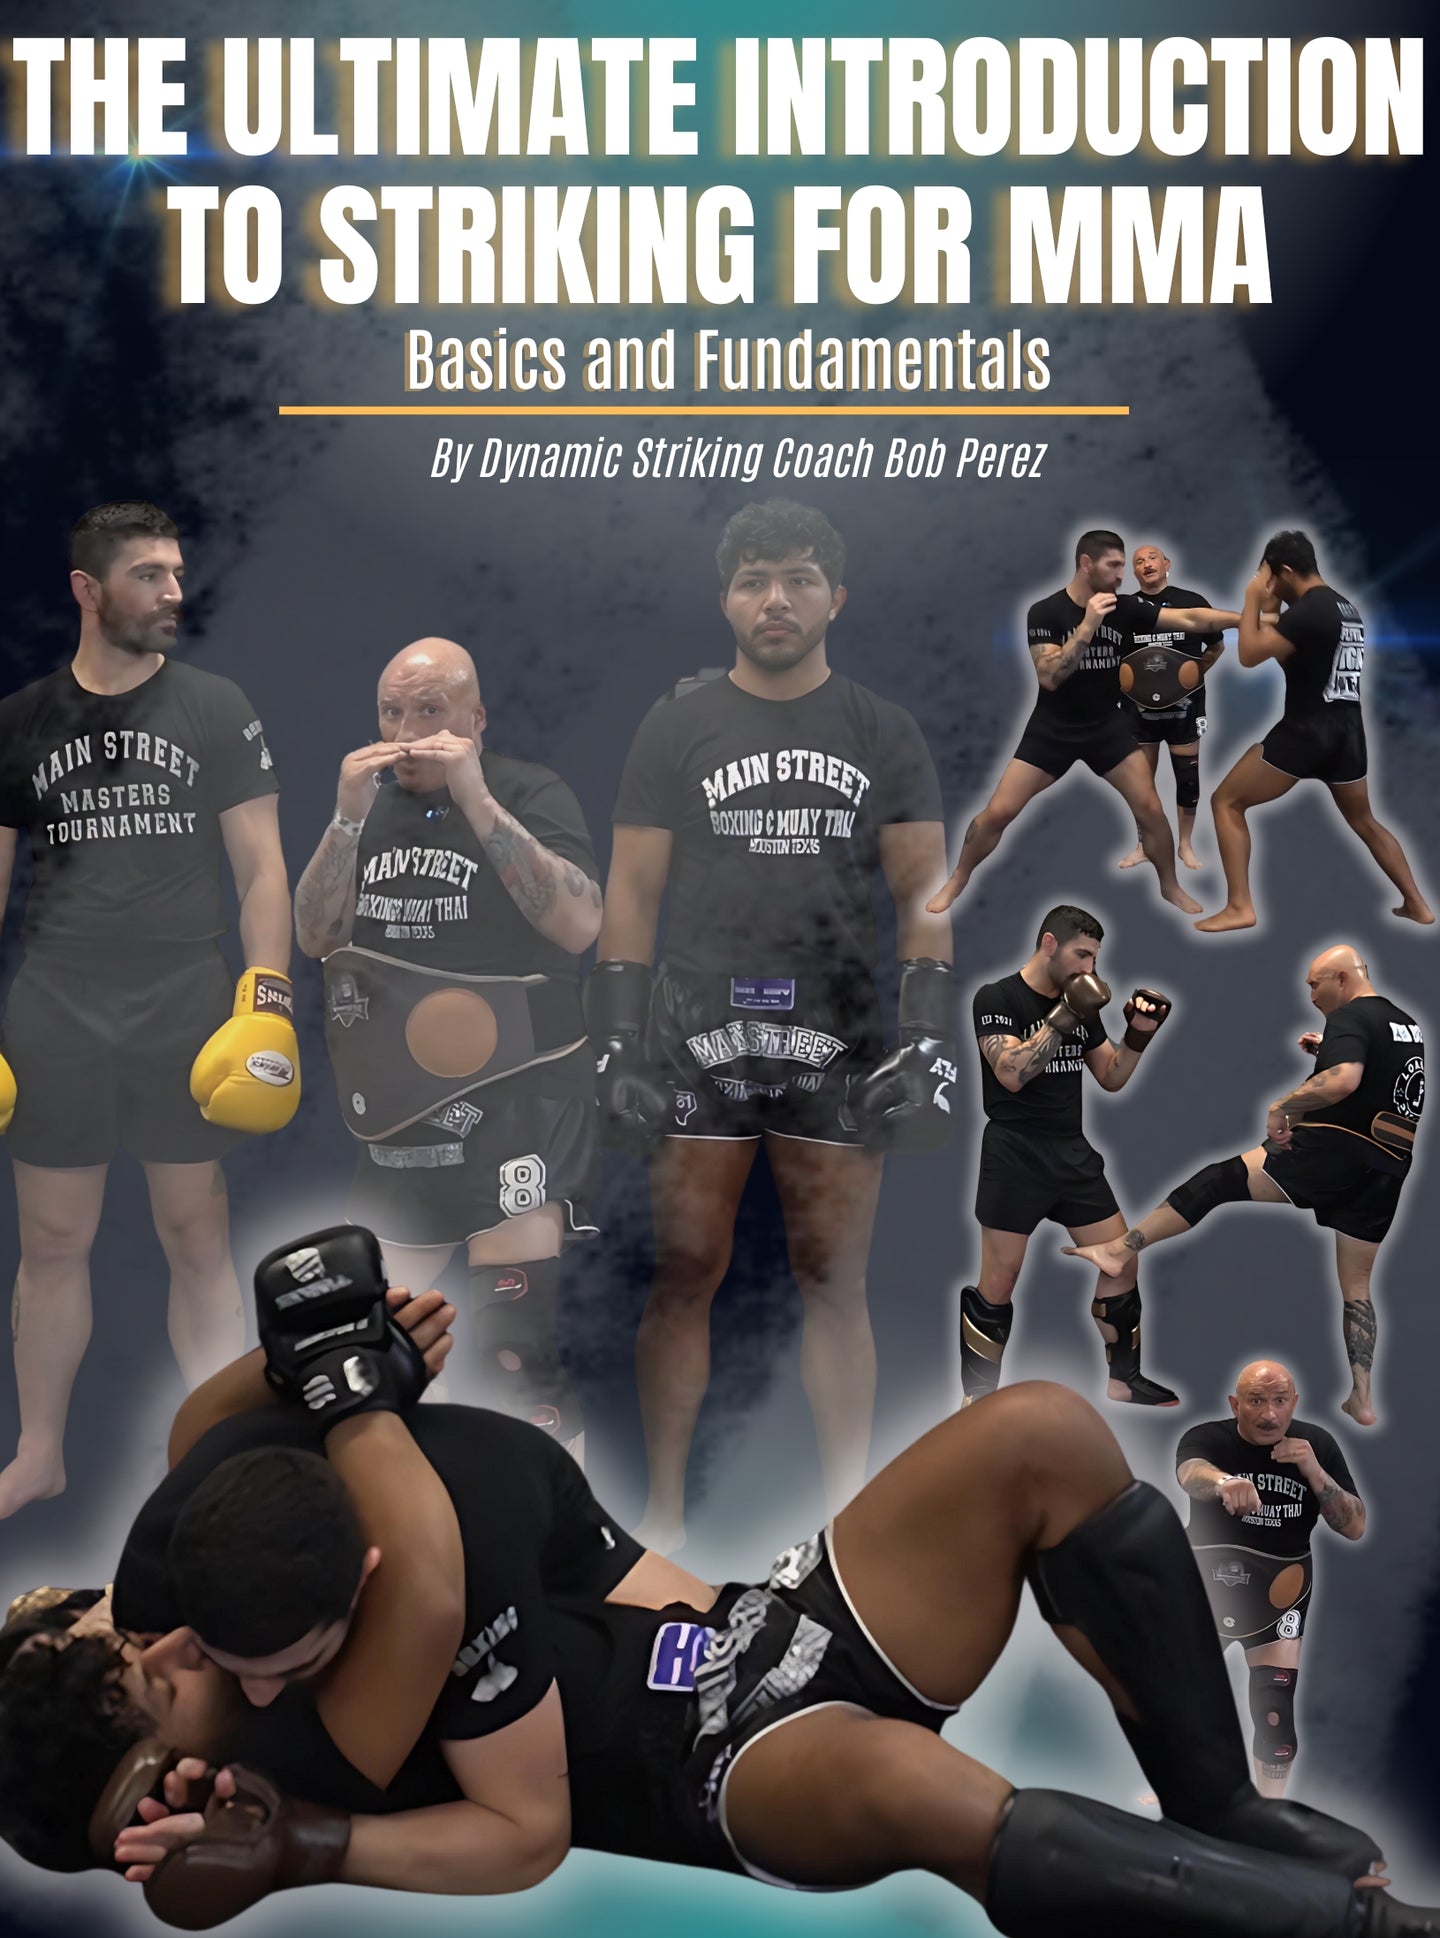 The Ultimate Introduction To Striking For MMA by Bob Perez - BJJ Fanatics